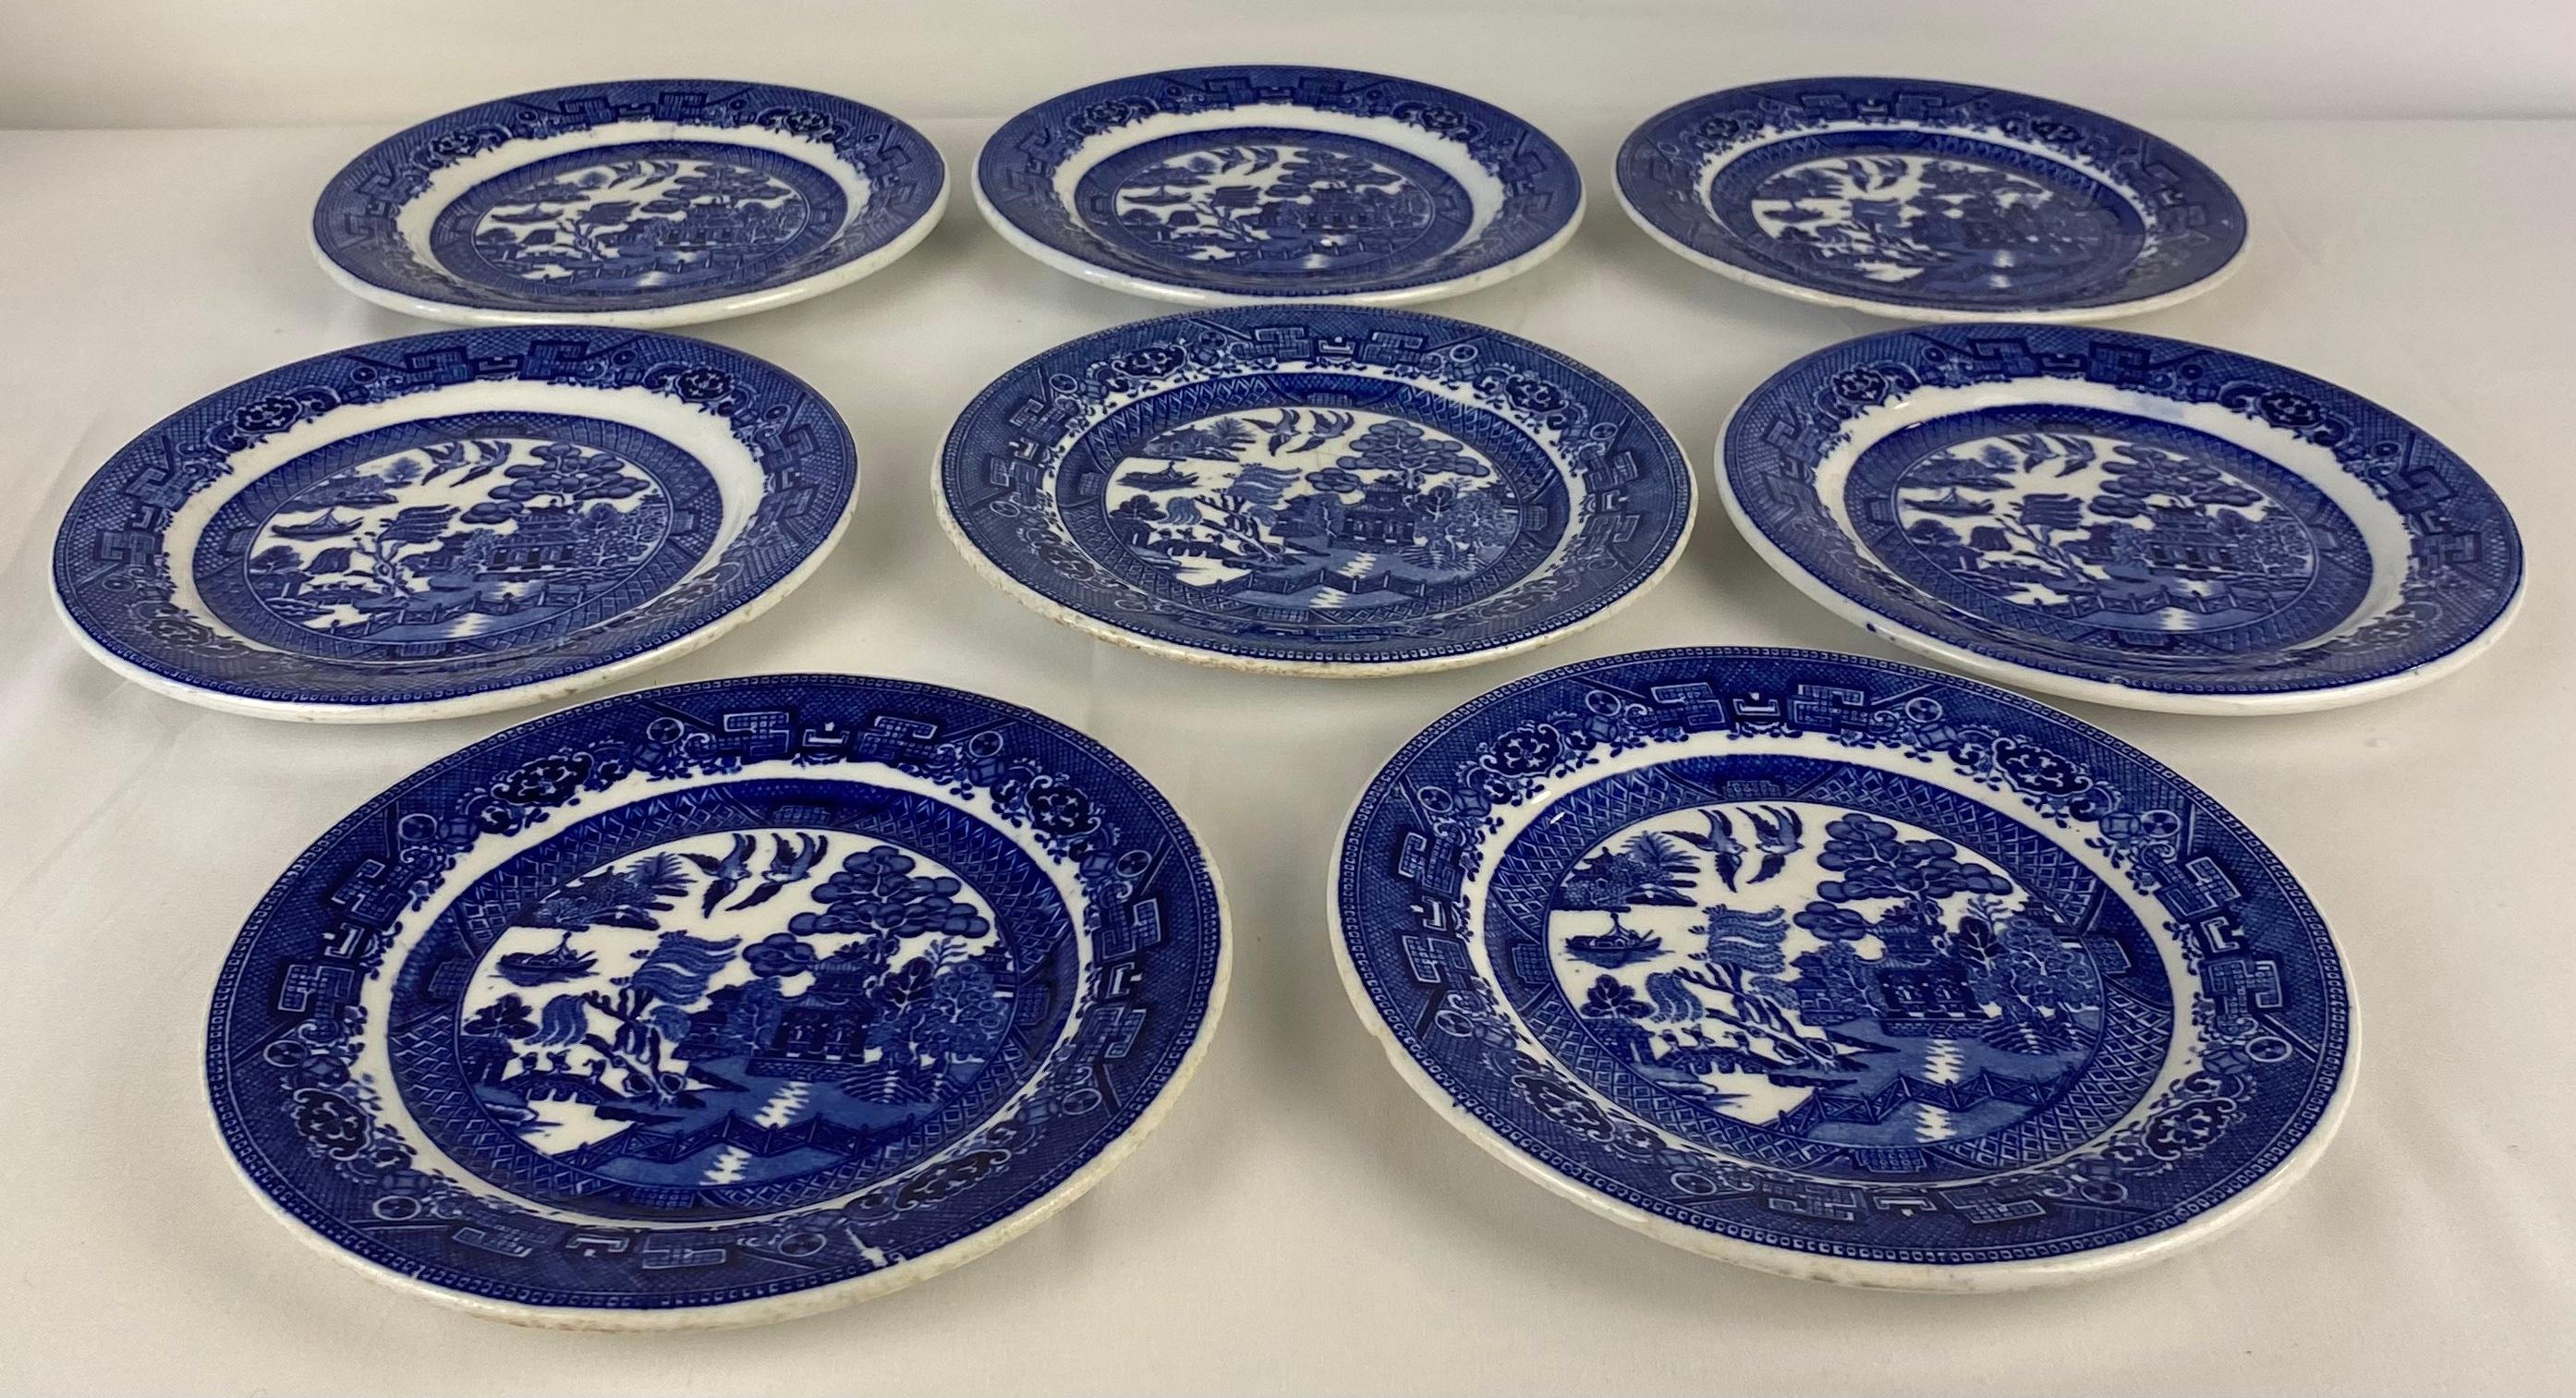 A good quality set of 8 antique English delft porcelain serving dishes.
Manufactured by John Maddock & Sons, England, circa 1850-99.
Chinioserie style. 

Each measures: 7